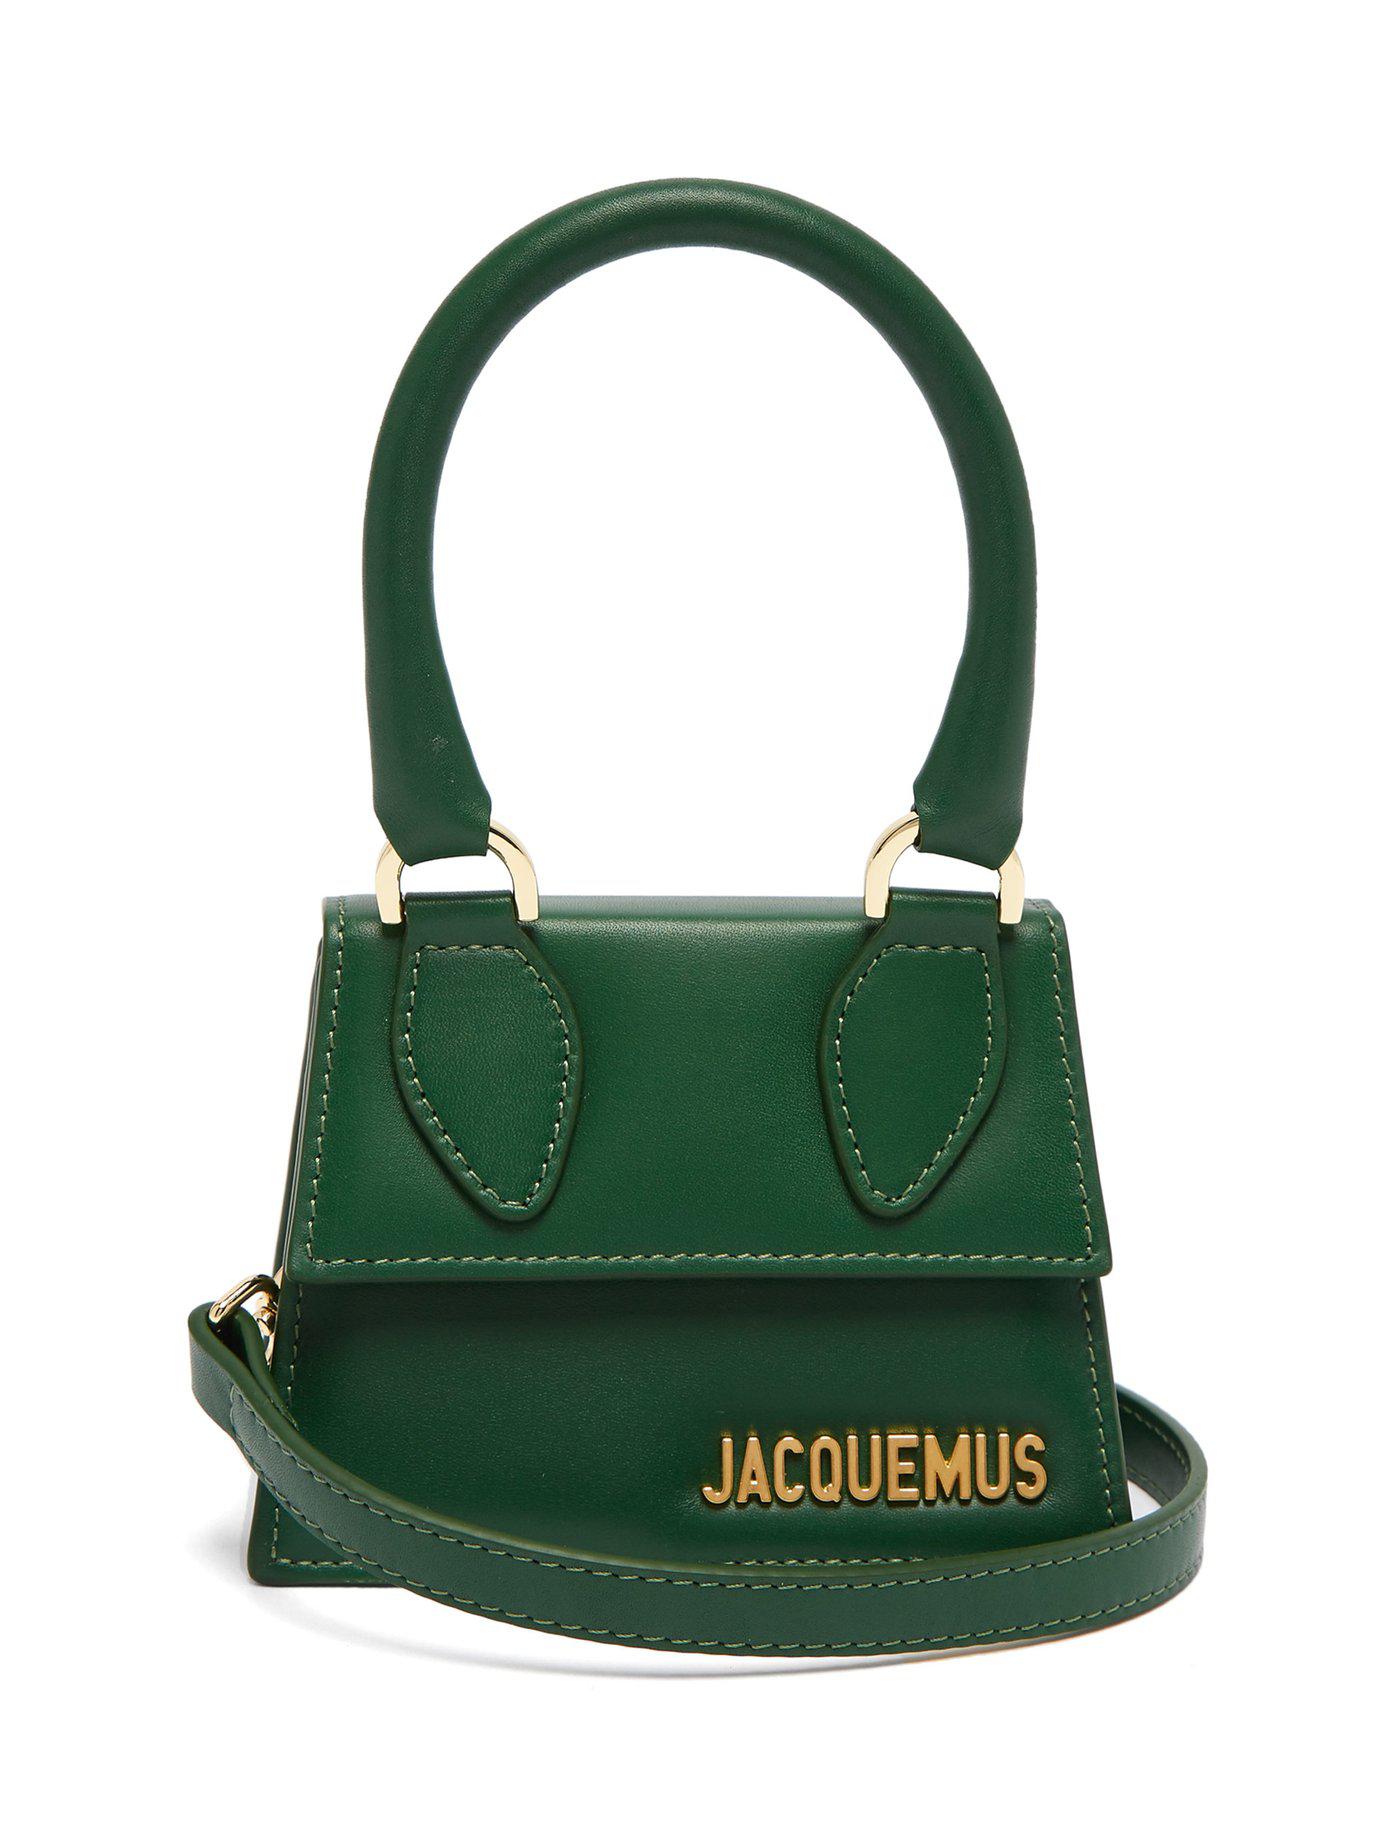 Jacquemus Le Chiquita Leather Micro Bag in Green | Lyst